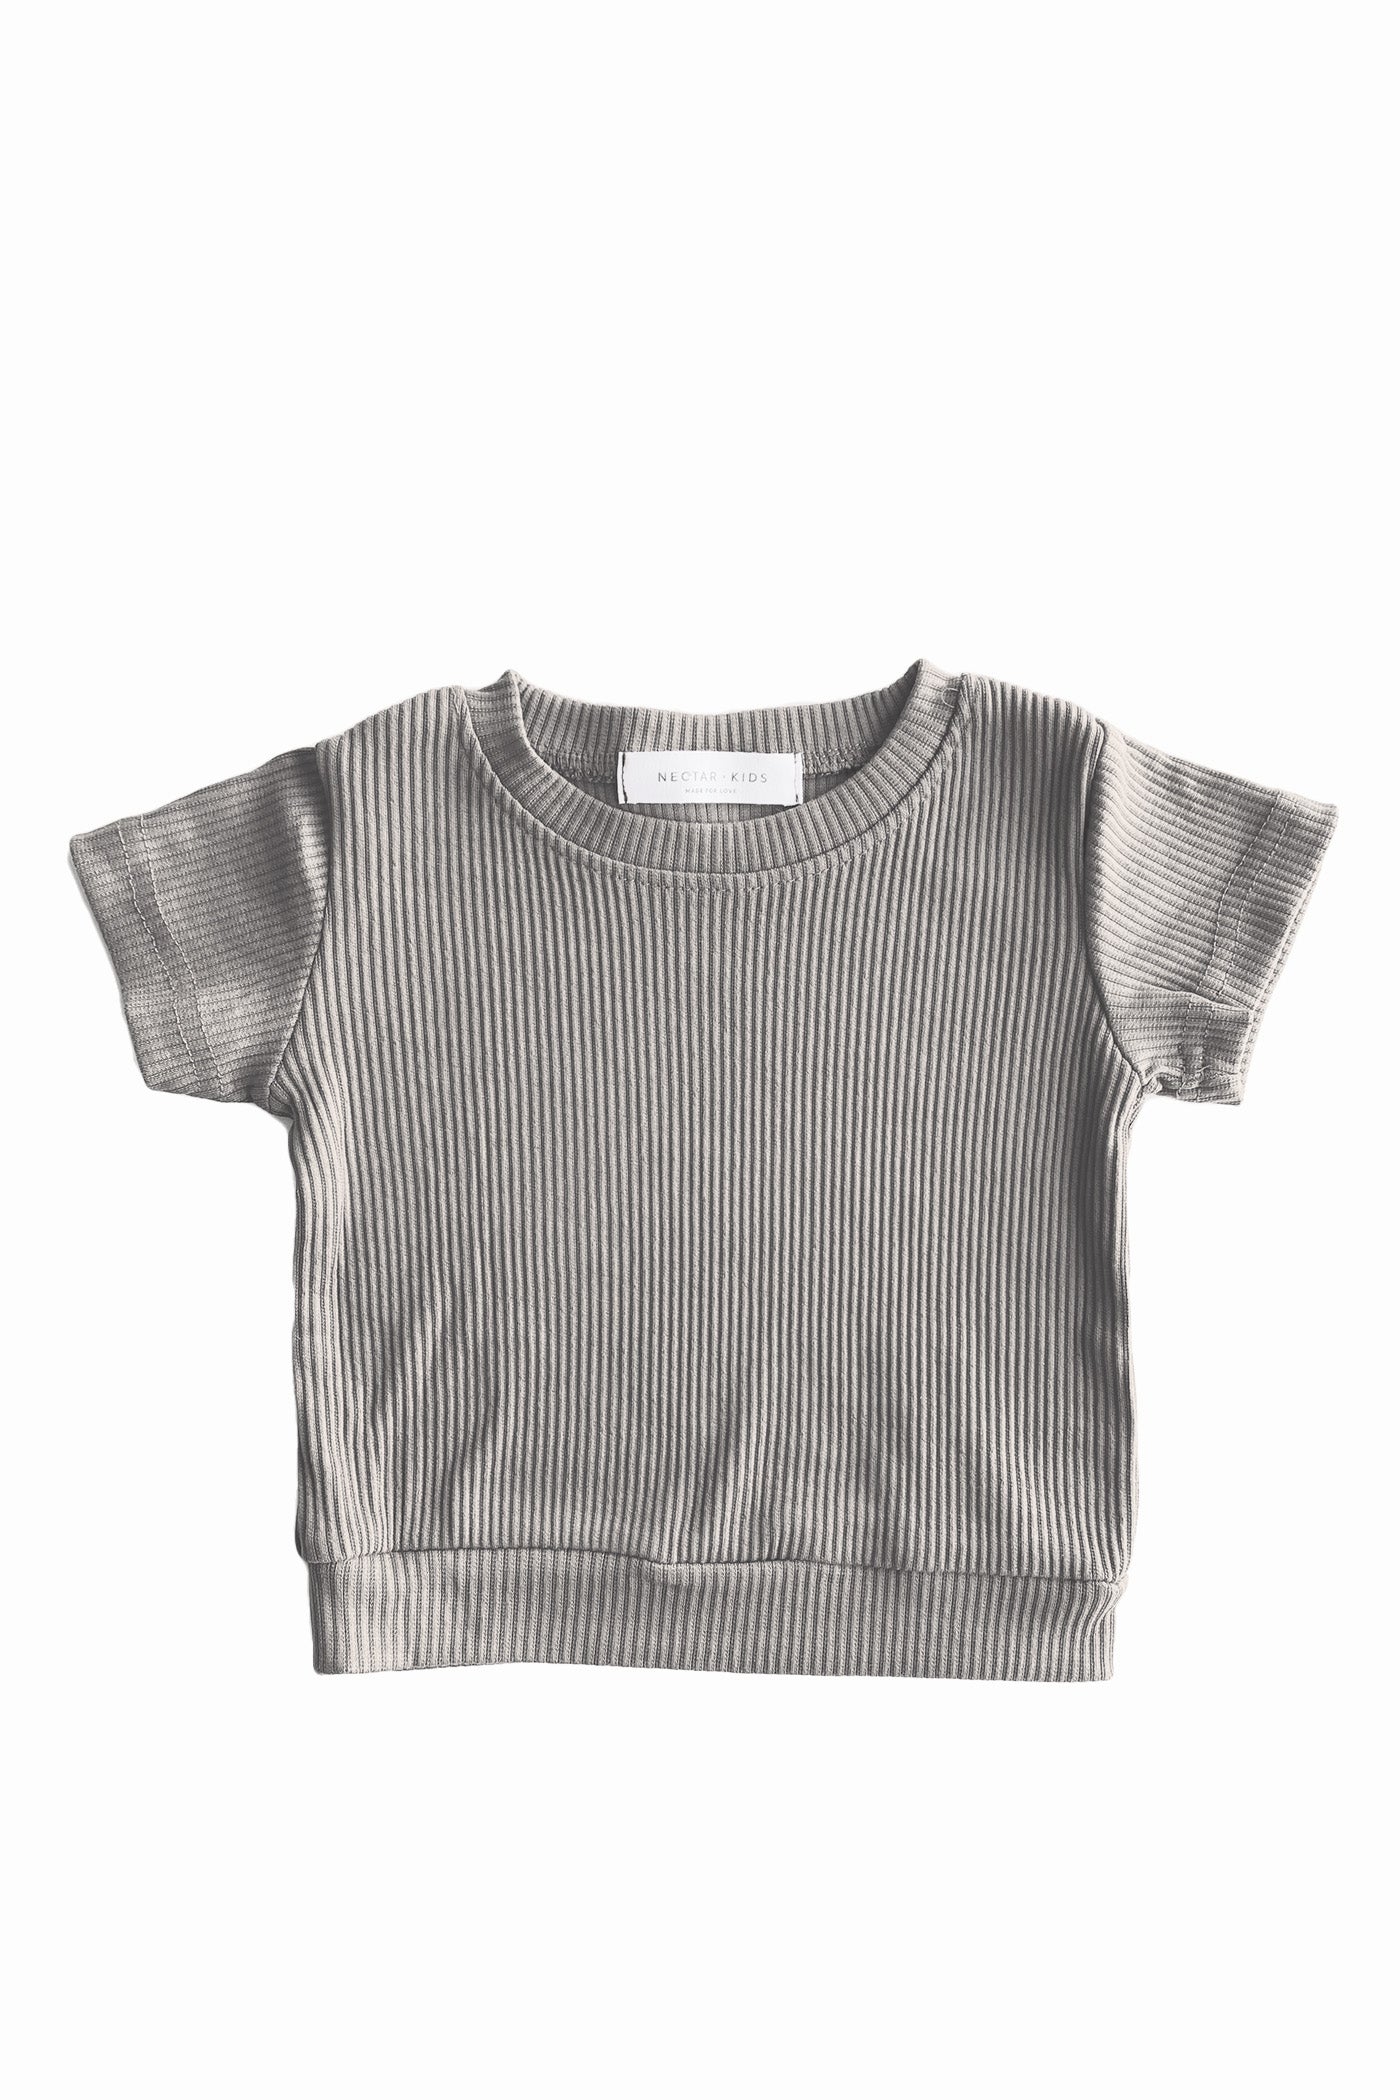 Ribbed Knit Kids Top